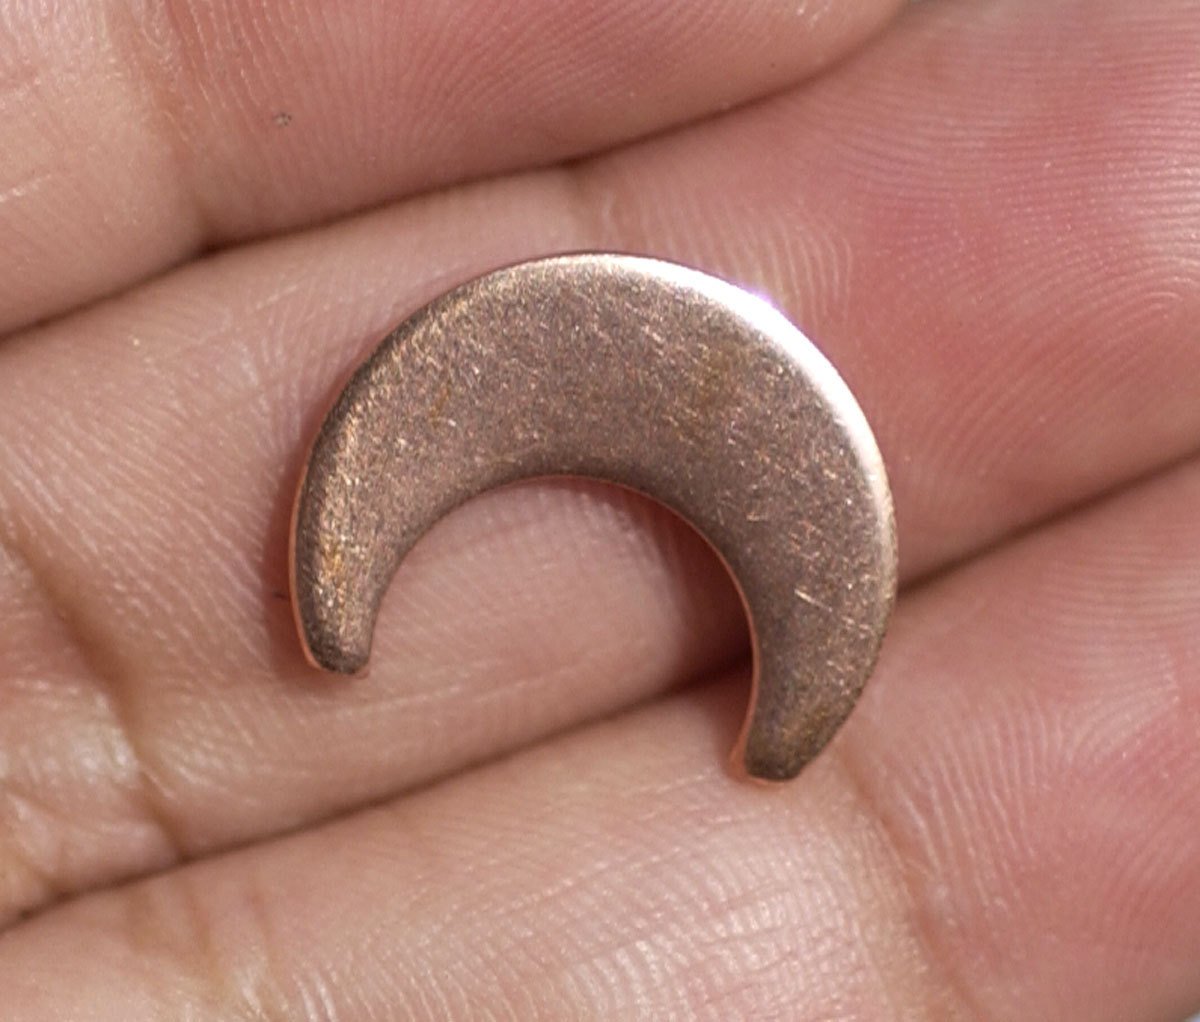 Copper Moon Cheshire 16mm x 12.8mm 20g Blanks for Enameling Metalworking Stamping Texturing Soldering Variety of Metals,